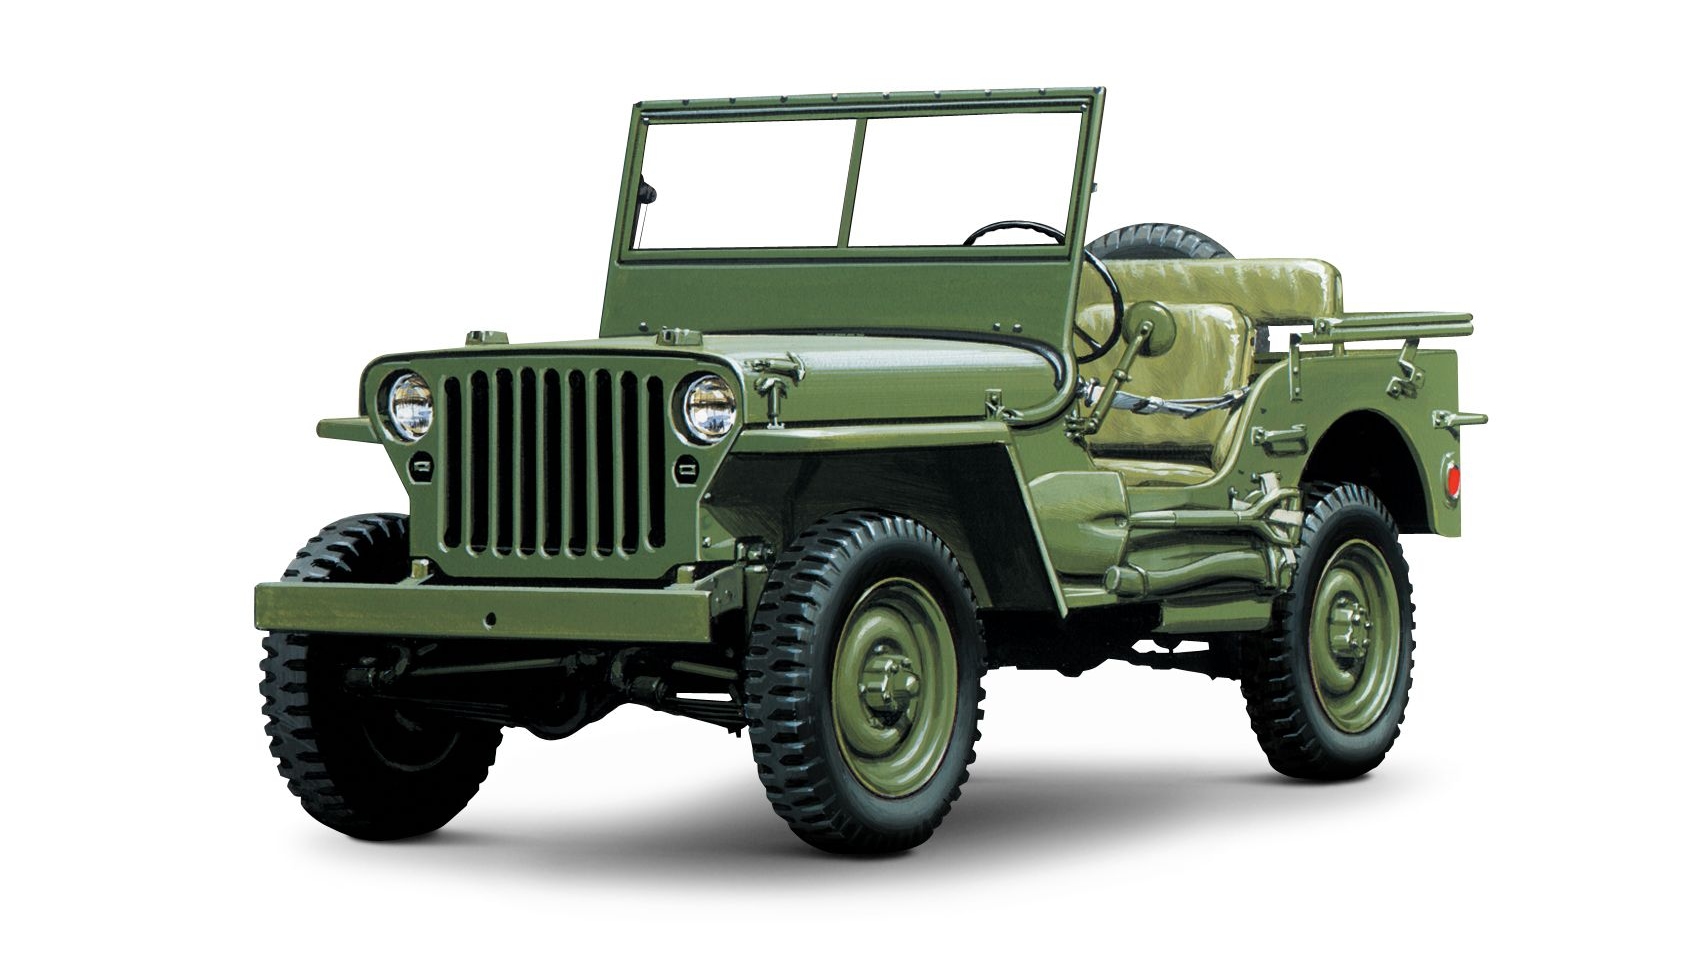 1944 Willys MB jeep